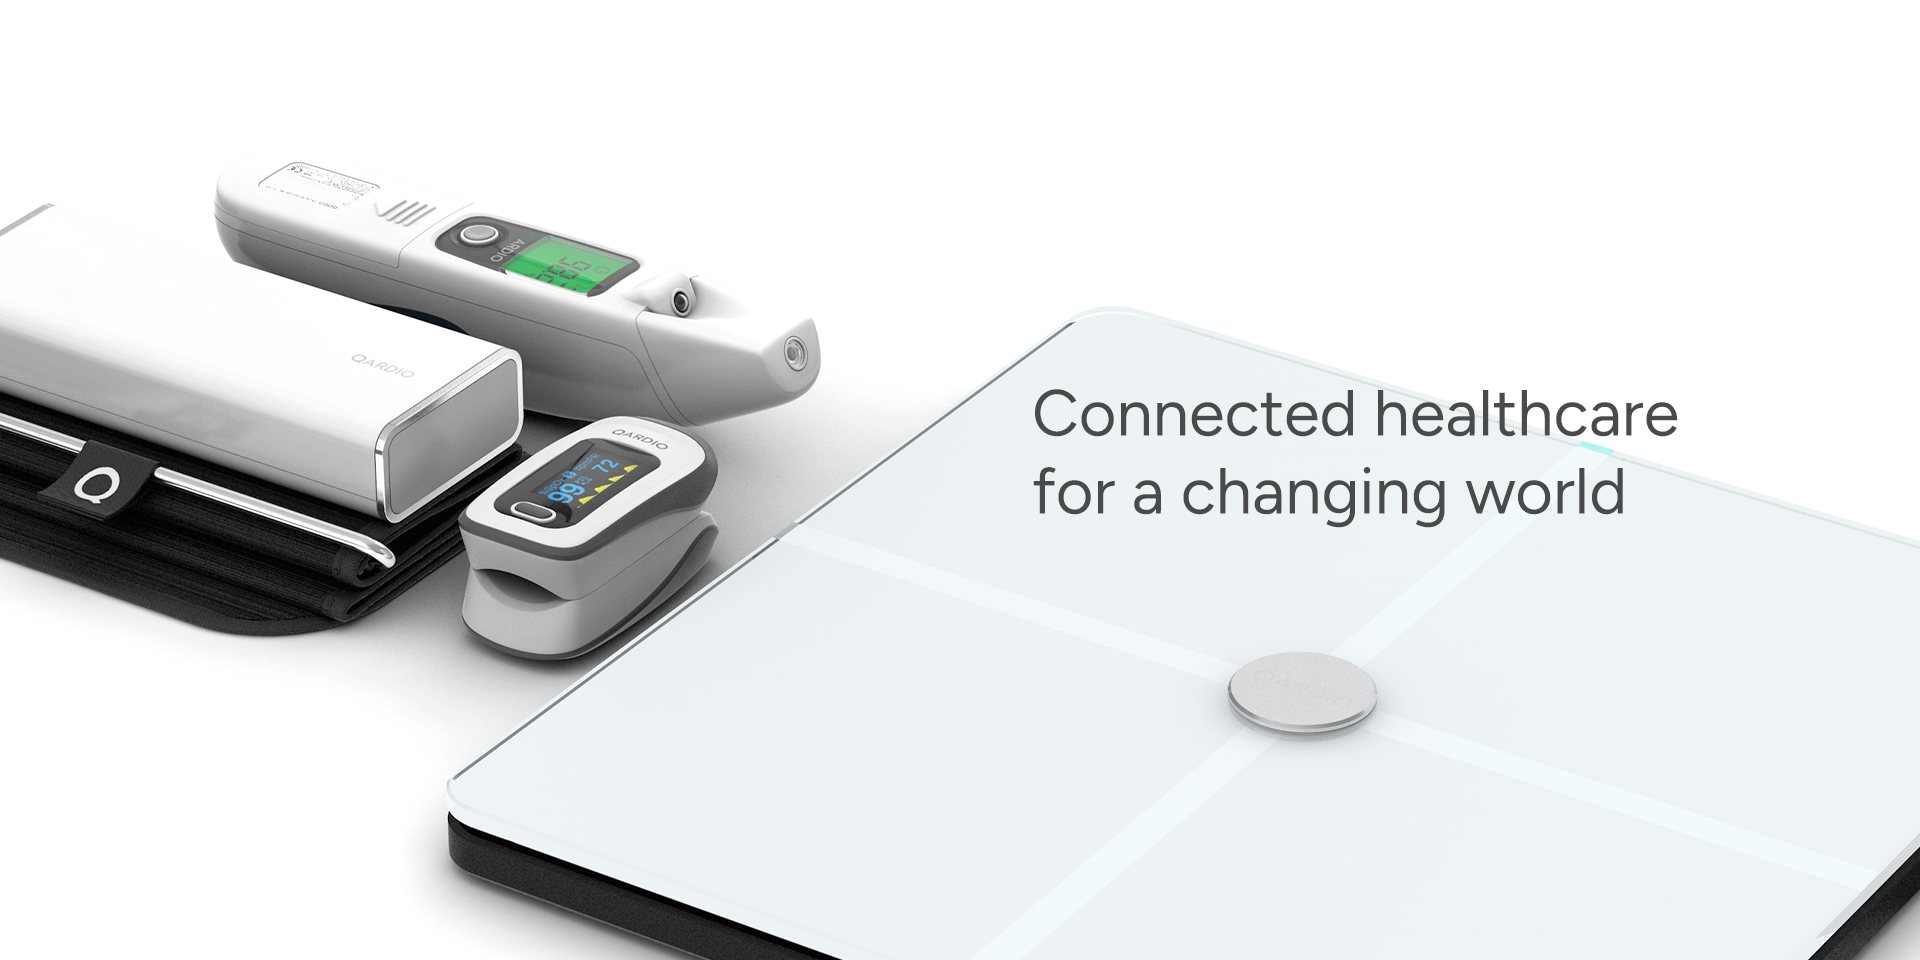 Connected healthcare for a changing world